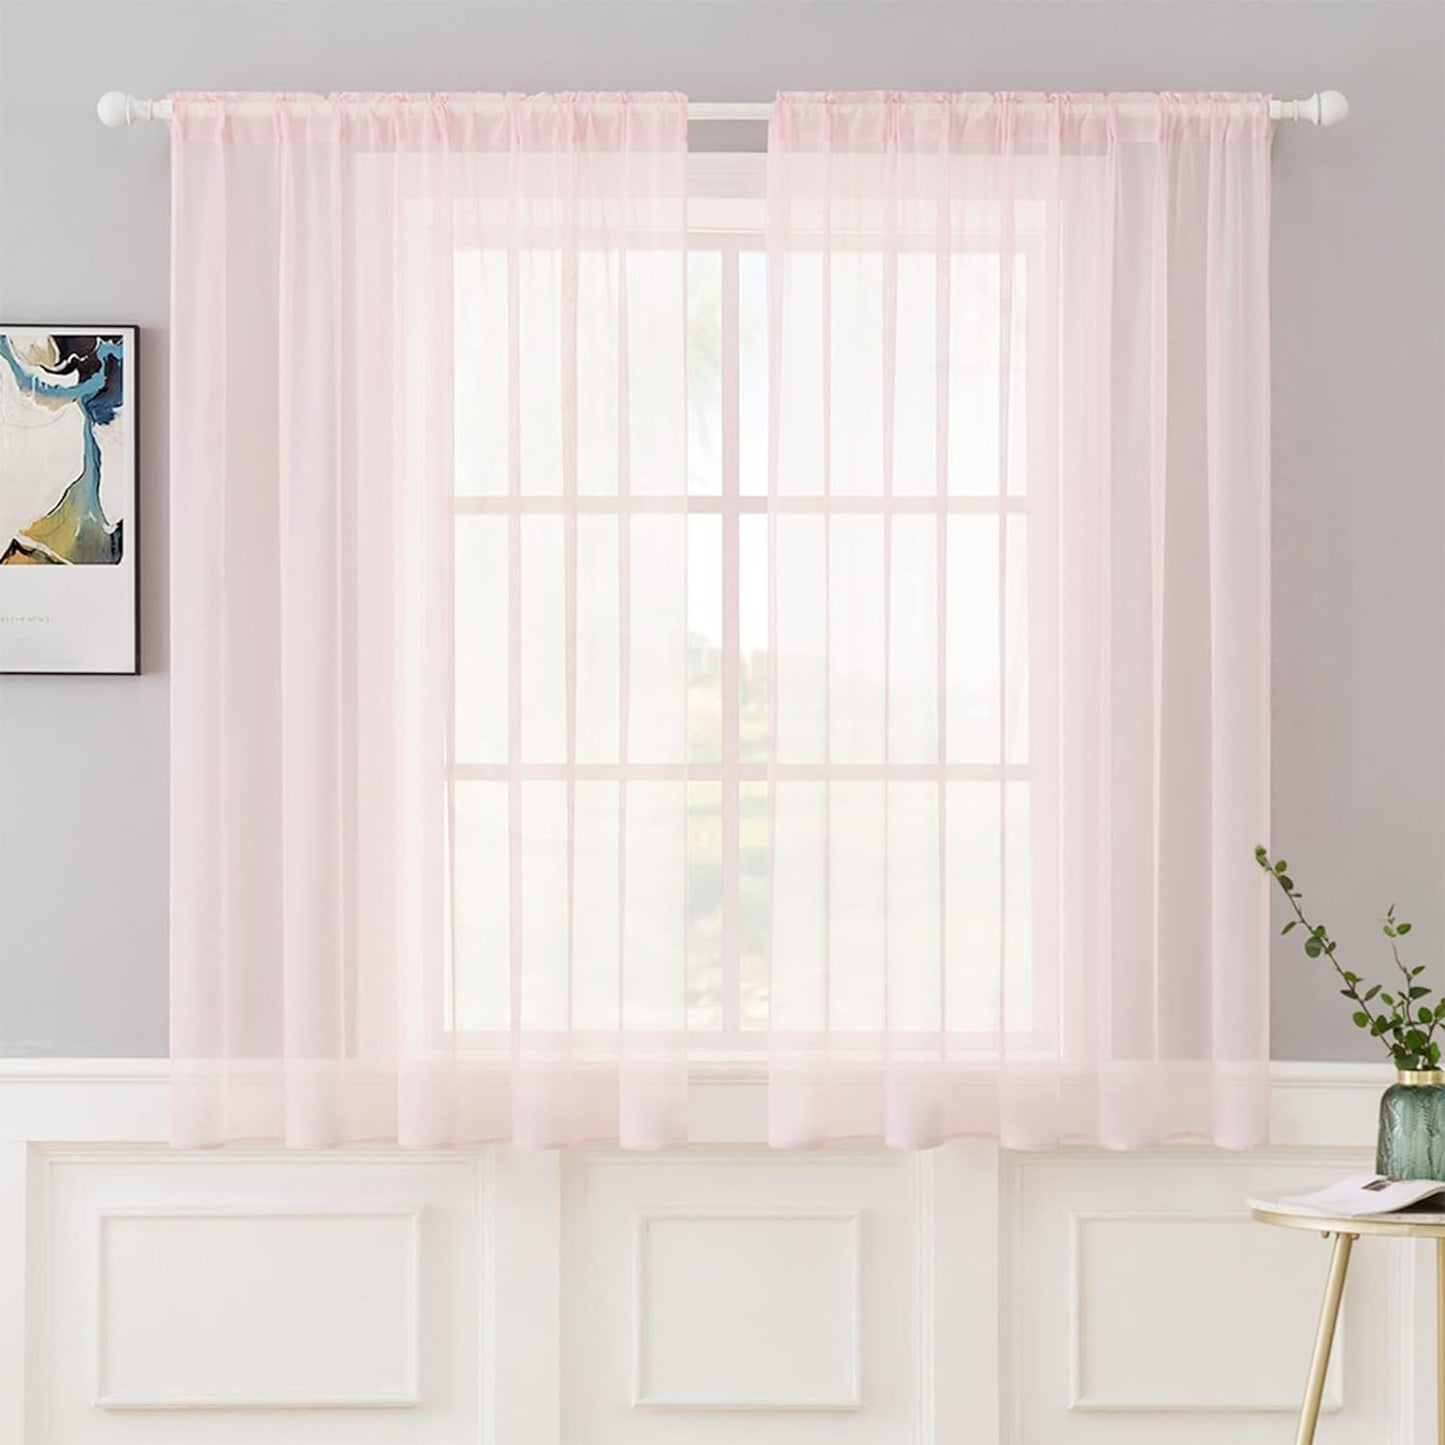 MIULEE White Sheer Curtains 96 Inches Long Window Curtains 2 Panels Solid Color Elegant Window Voile Panels/Drapes/Treatment for Bedroom Living Room (54 X 96 Inches White)  MIULEE Baby Pink 54''W X 54''L 